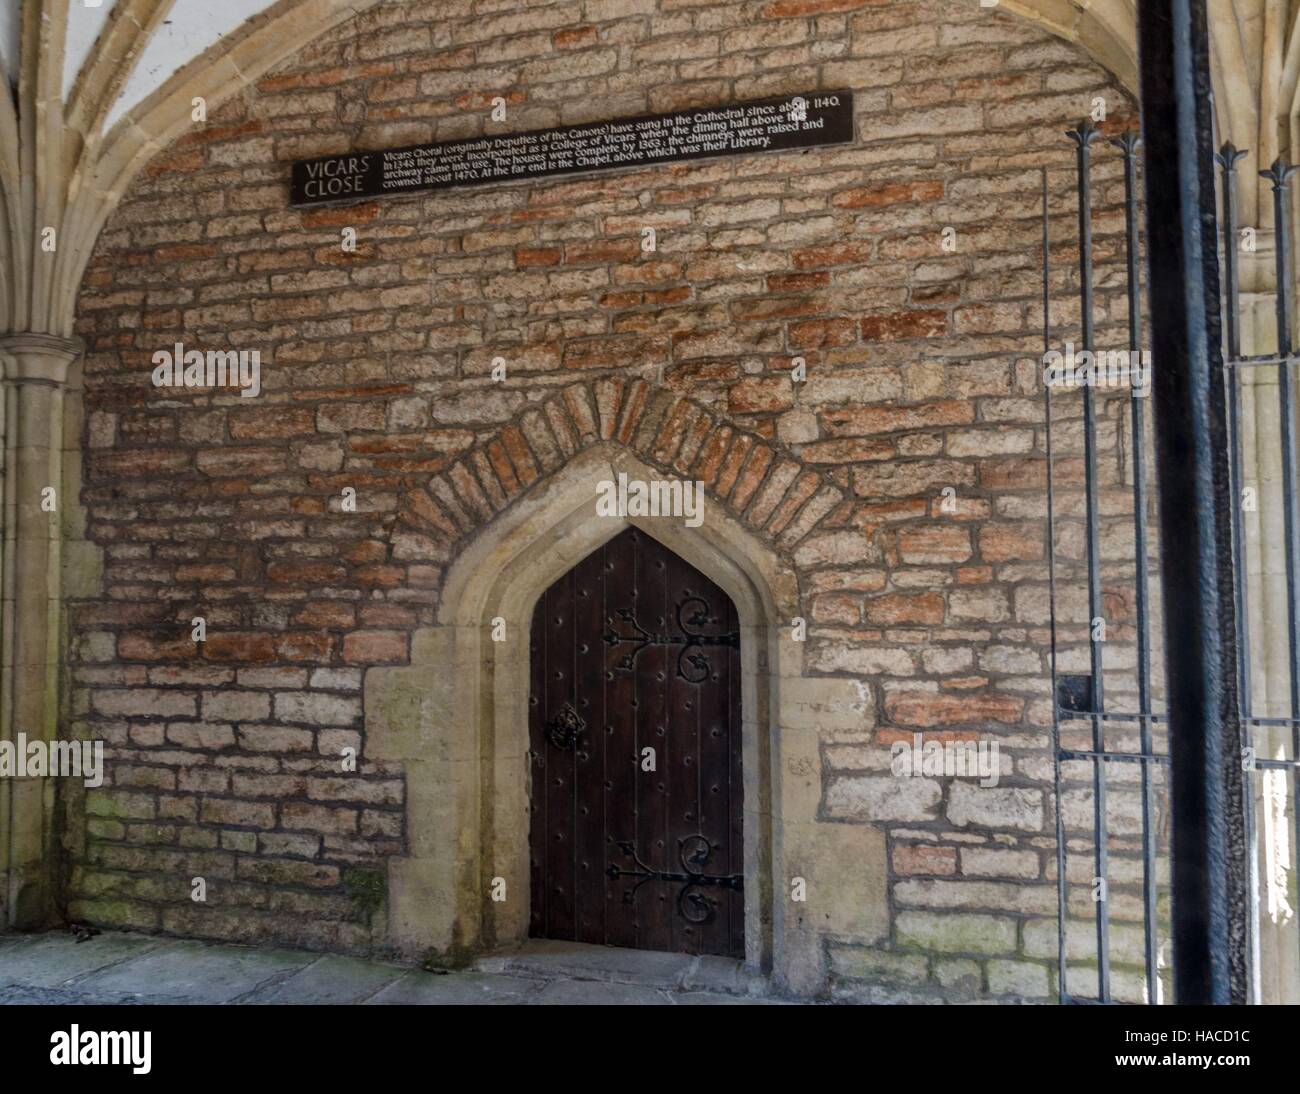 The archway at the entrance to the historic street of Vicar's Close in Wells, Somerset, England Stock Photo